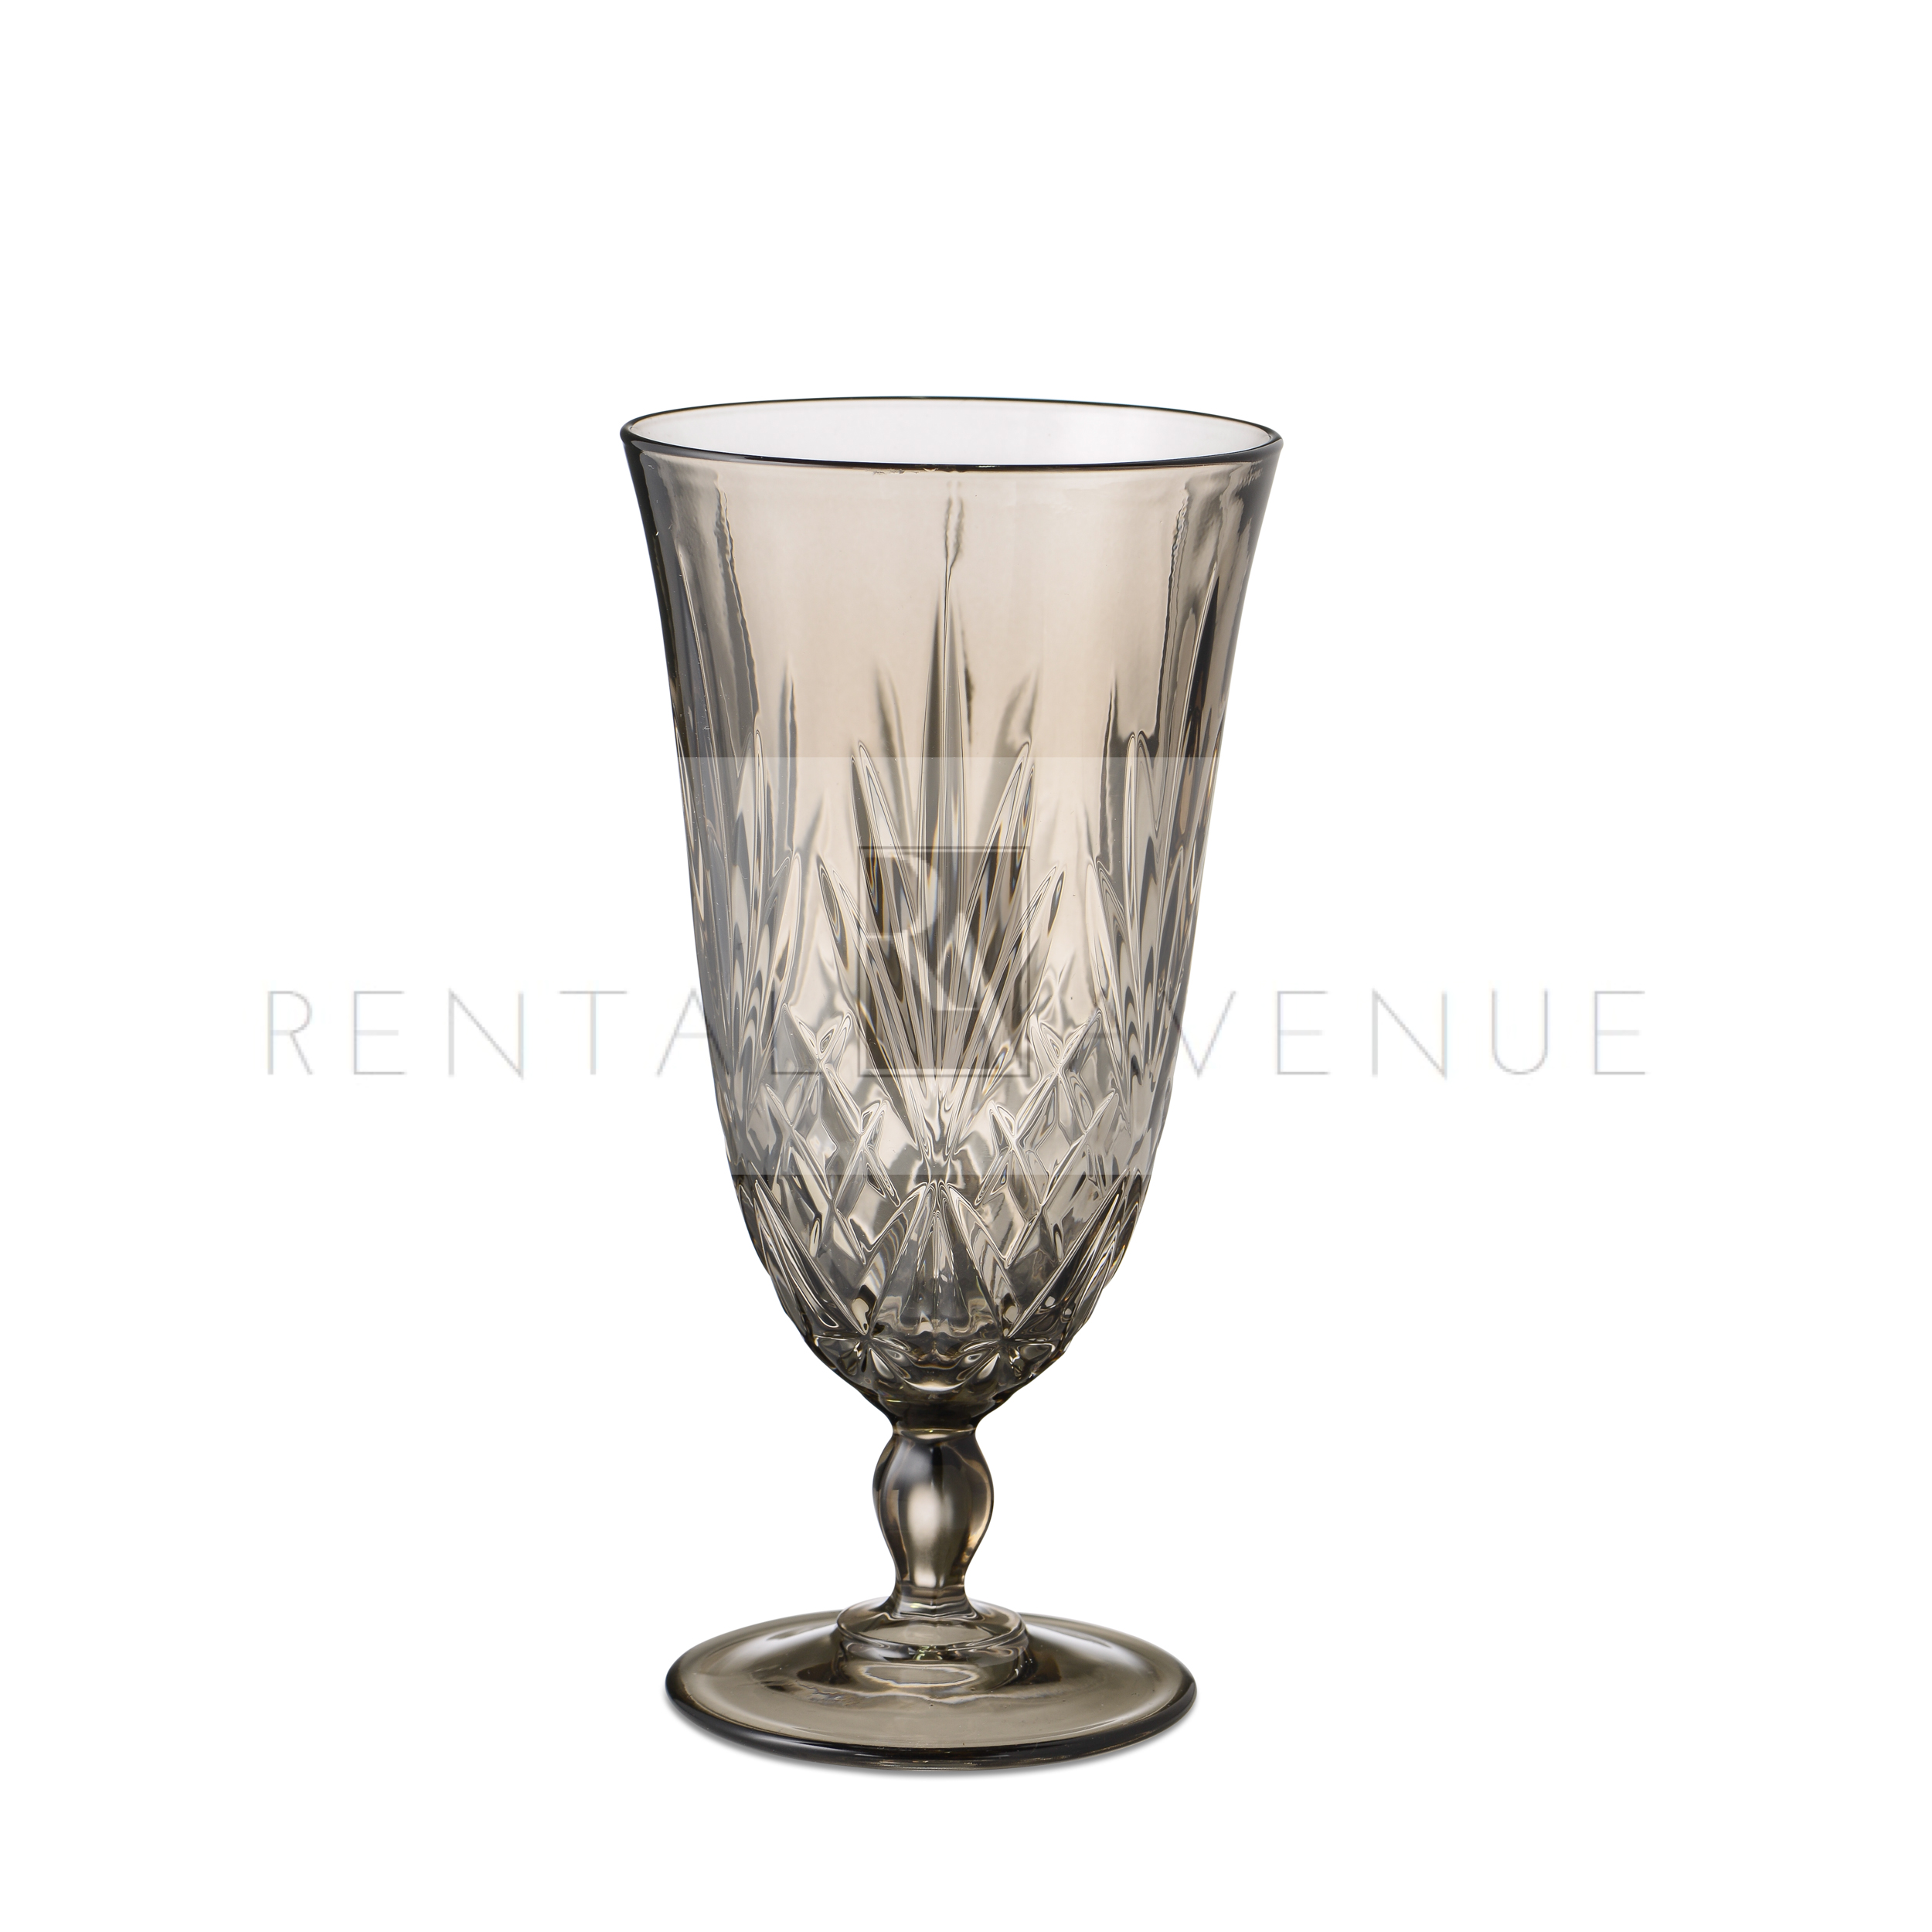 https://therentalave.com/wp-content/uploads/2021/04/Melodia-Smoke-Water-Goblet-13oz.jpg